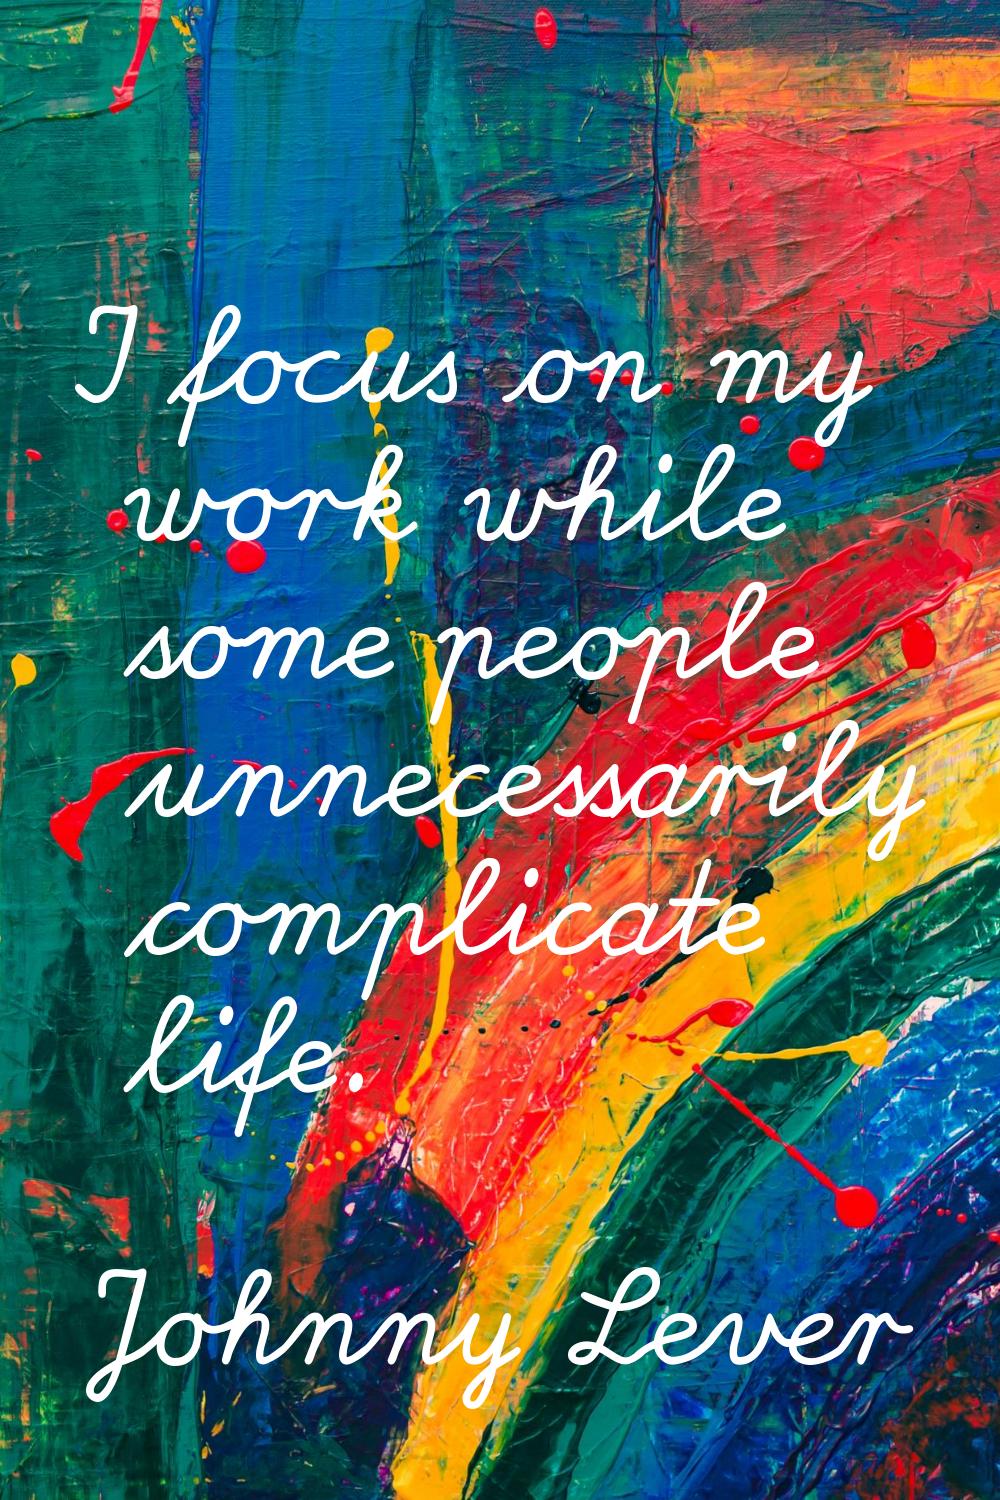 I focus on my work while some people unnecessarily complicate life.